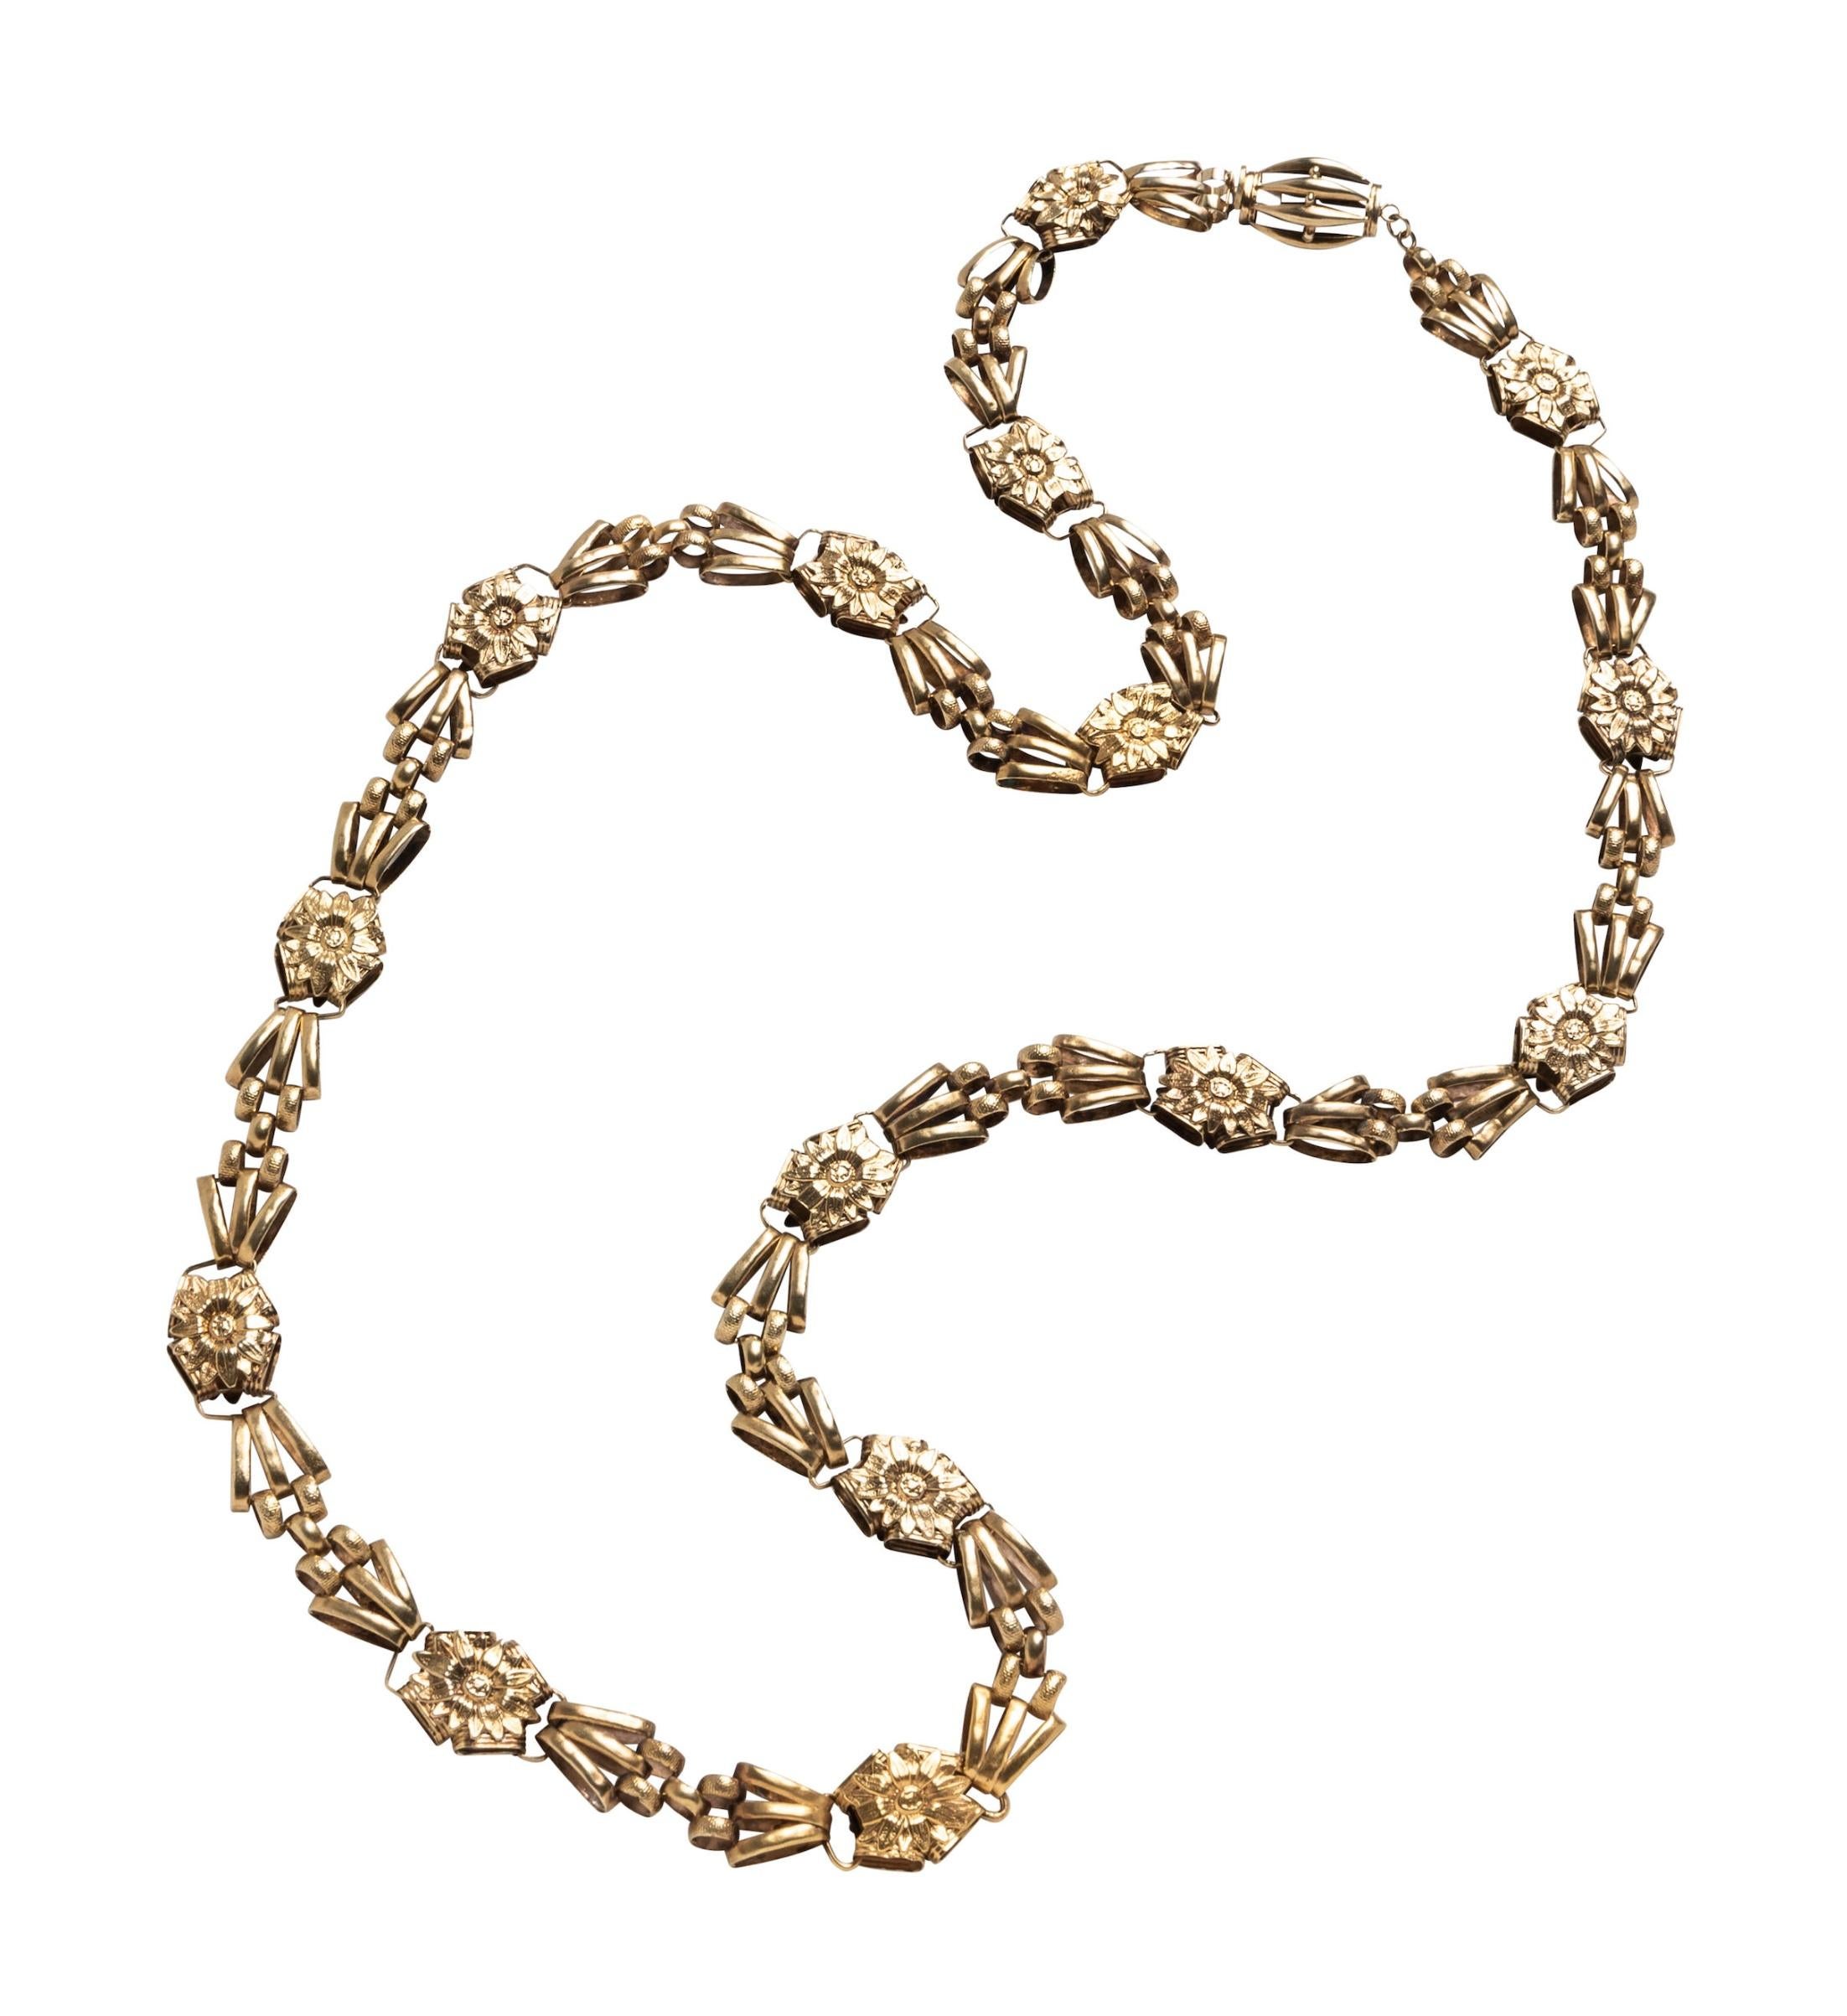 Antique Georgian gold long chain 

Repoussé flower links 

Size: width 0.63 inch, length 41.25 inches
Total weight: 62.3 grams